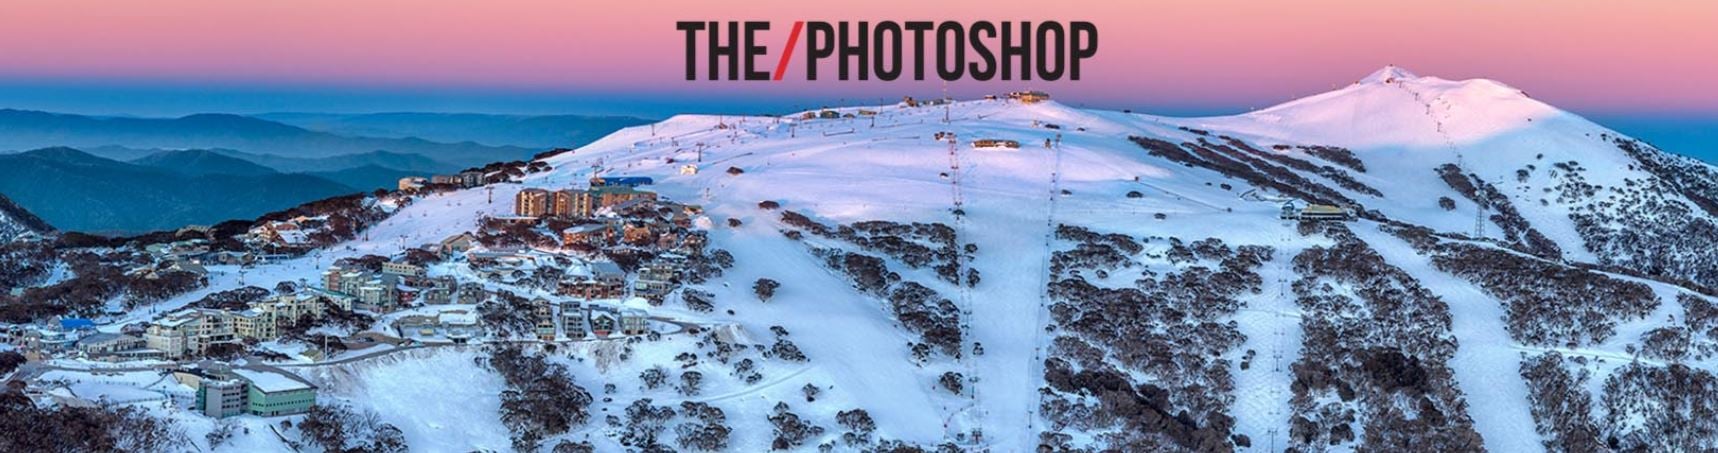 The Photo Shop Mt Buller for race shots, private shoots and alpine art by Tony Harrington